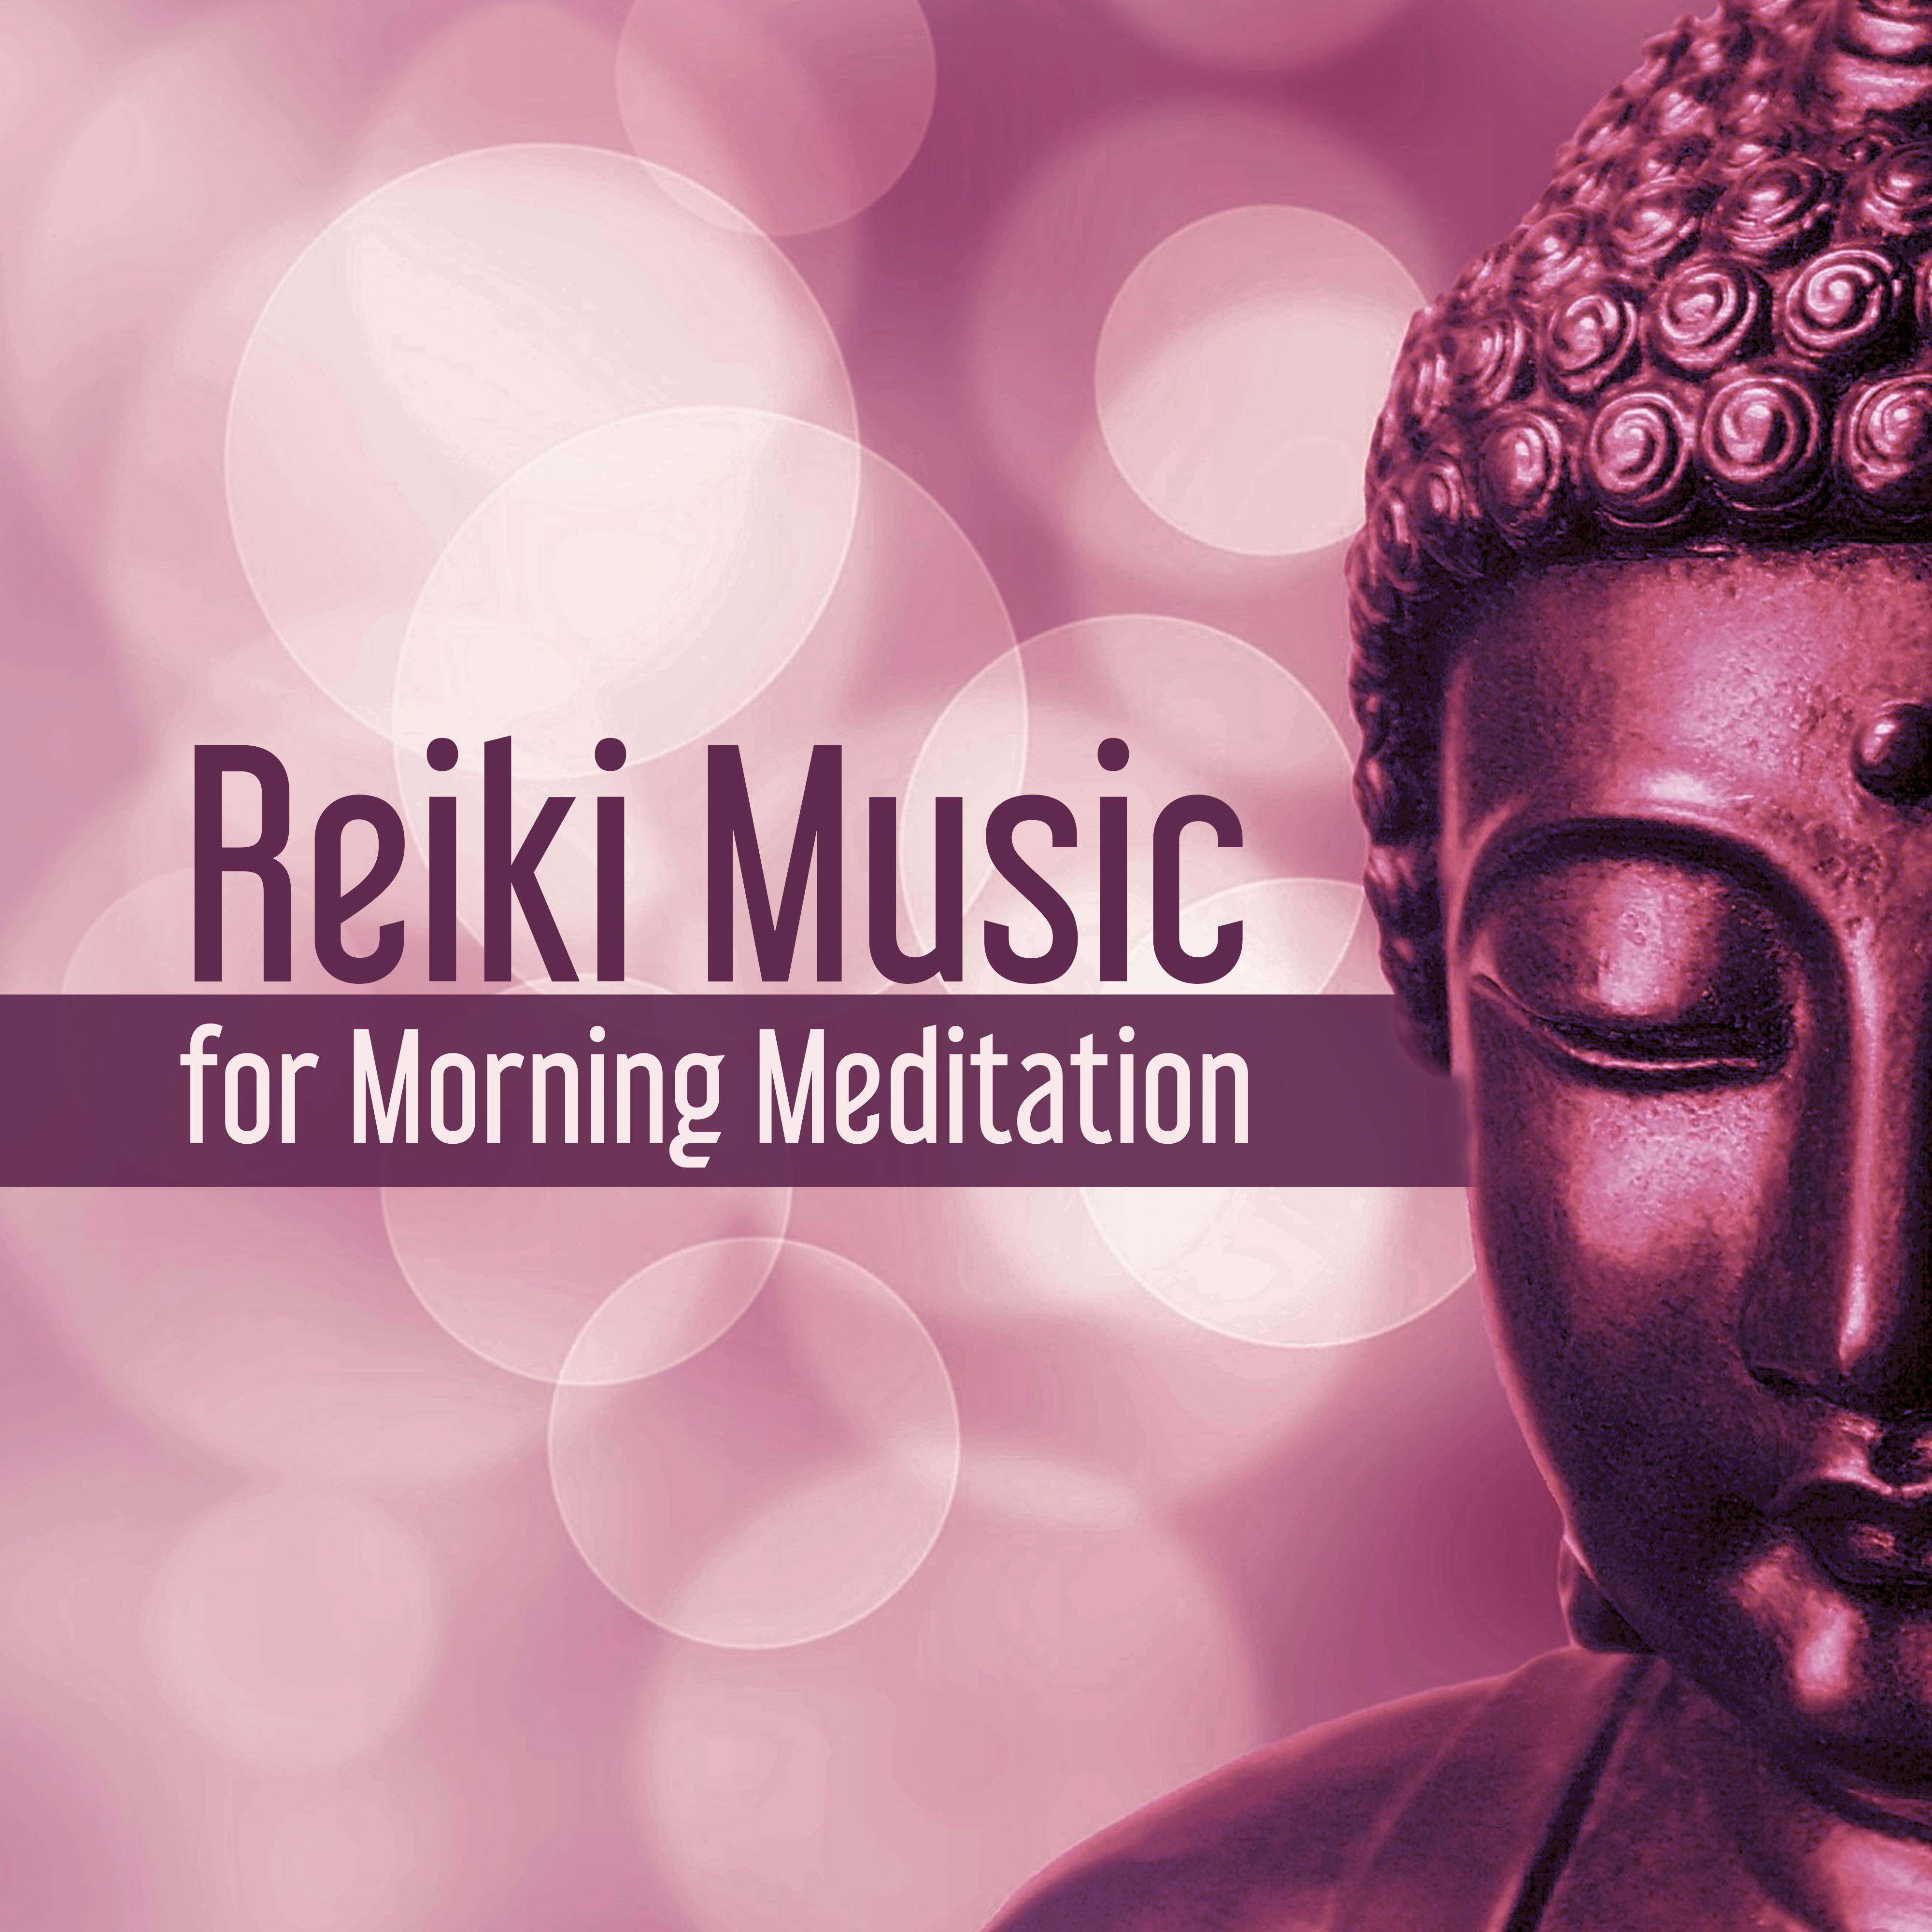 Reiki Music for Morning Meditation – Exercise Your Mind, Calmness & Harmony, Deep Concentration, Asian Zen, Soft Music